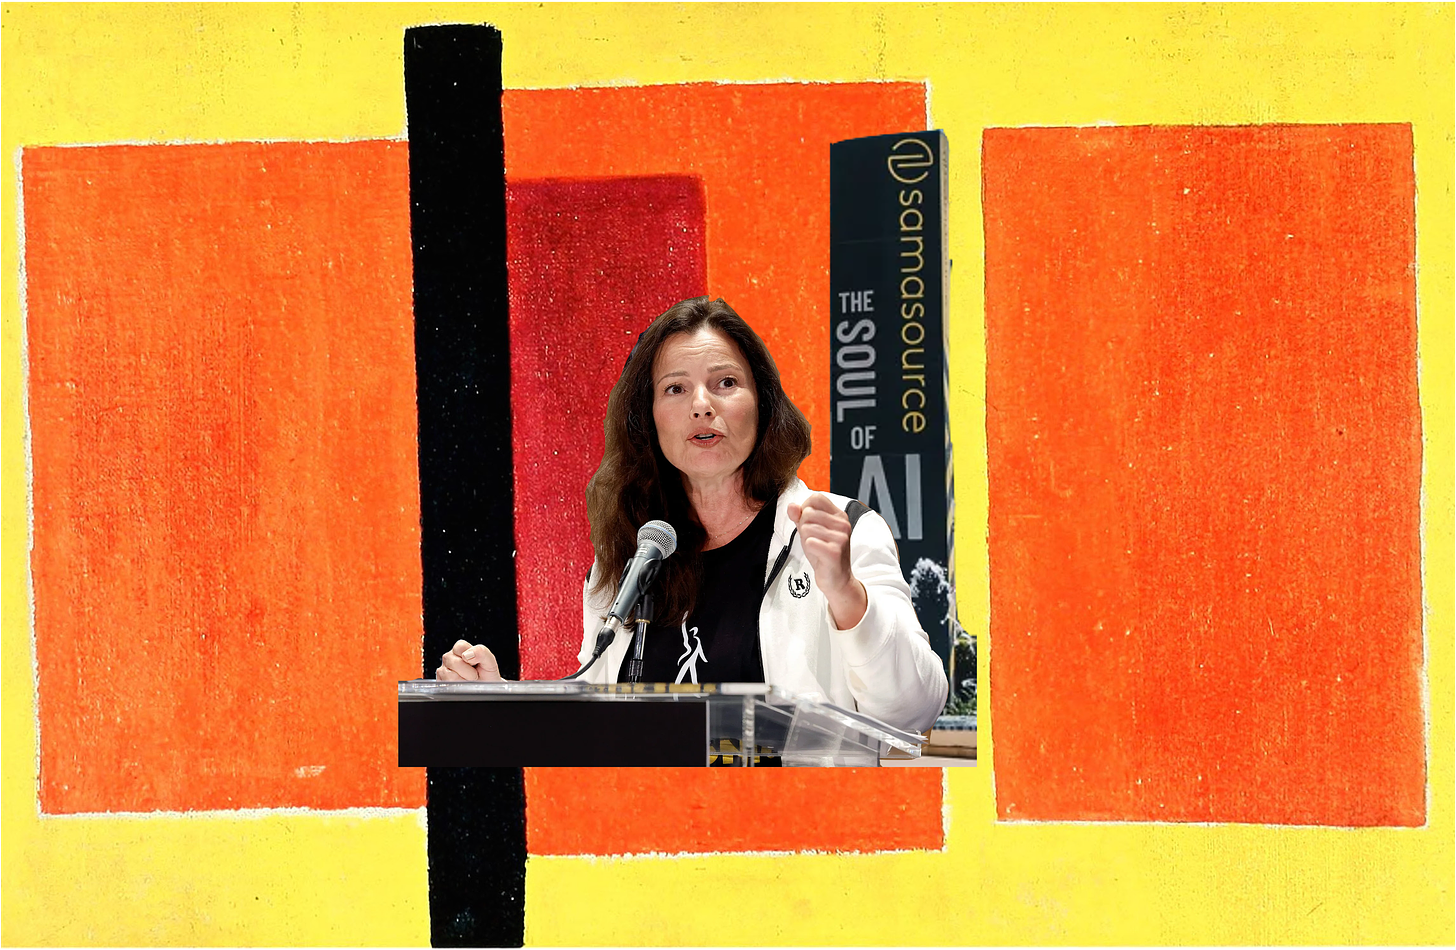 A photo of Fran Drescher, president of SAG-AFTRA delivering a speech on a lectern. To her right is a placard from Sama, a company outsourced to deliver content moderation for corporations based in the global north even as it operates in Nairobi, Kenya. Both these sit in front of a painting made up of a yellow background and three orange rectangles in a row. In between the first and second rectangle, is a tall but skinny black rectangle.